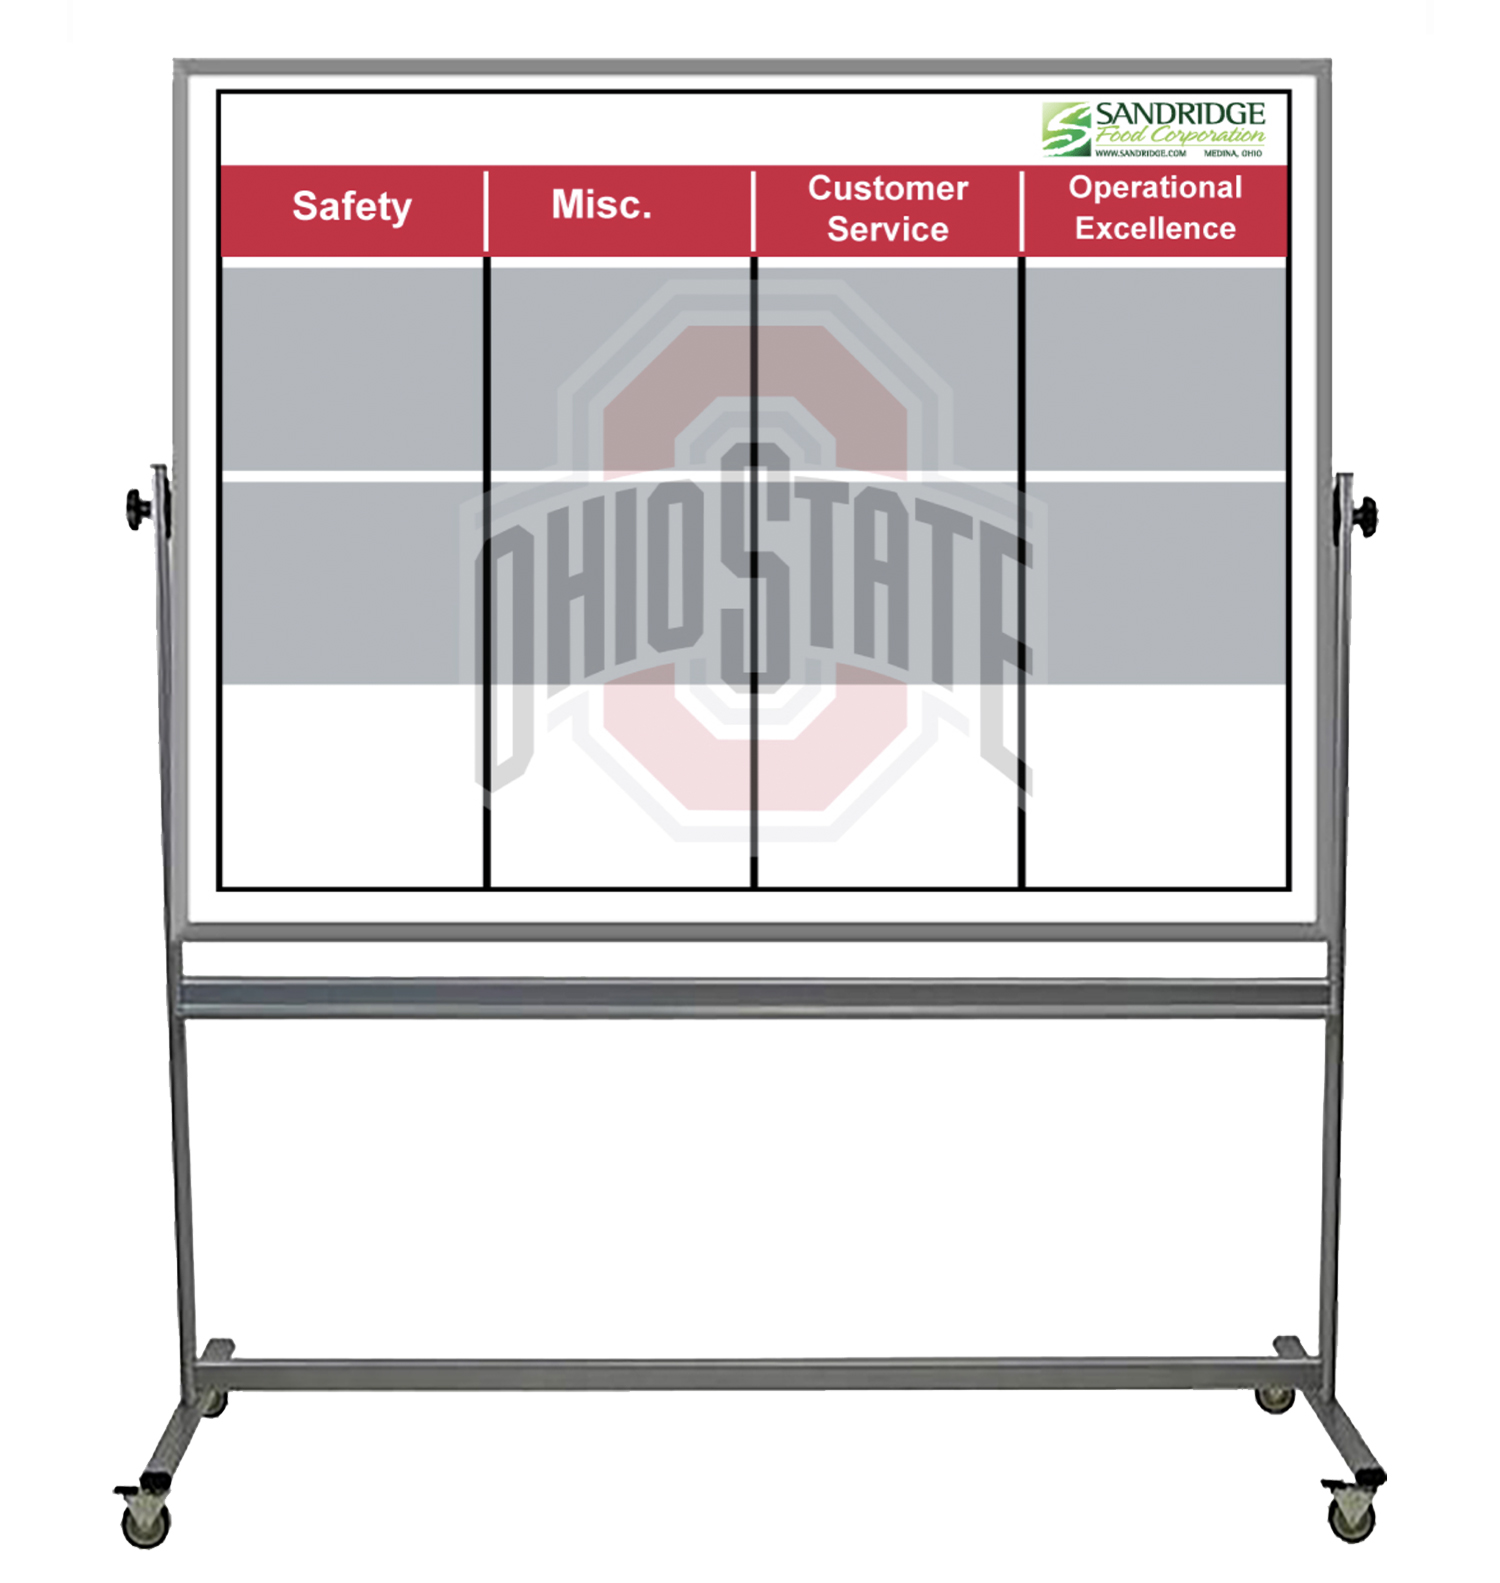 personalized dry erase board